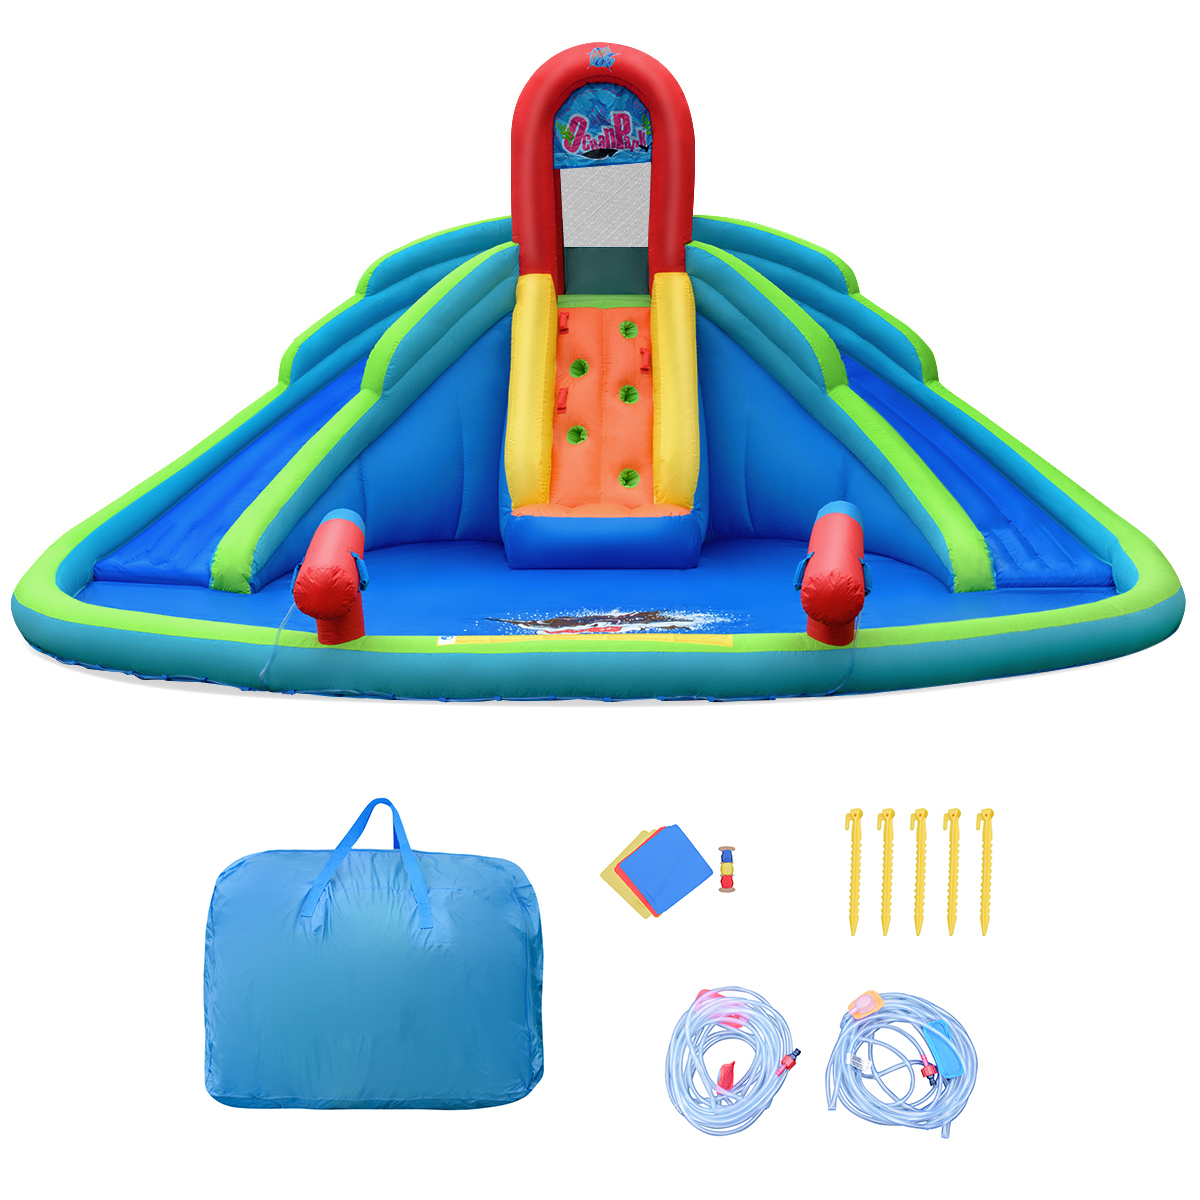 Inflatable Bounce House Water Park W/ Splash Pool Dual Slides Climbing Wall